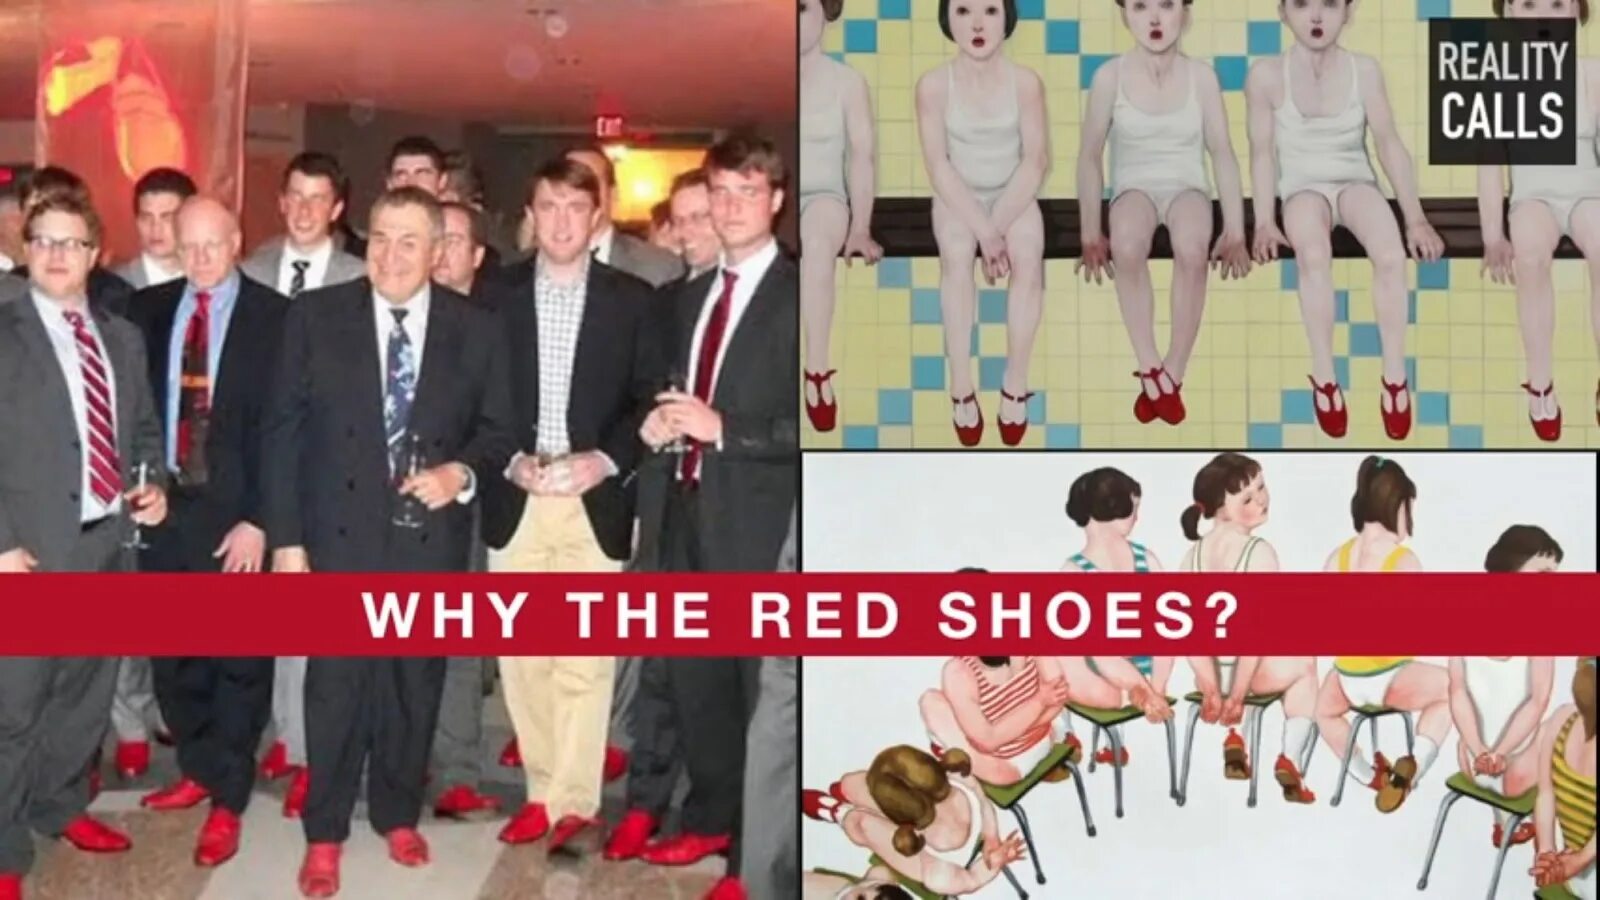 Tony Podesta Red Shoe. Red Shoes Cult. Tony Podesta картины.